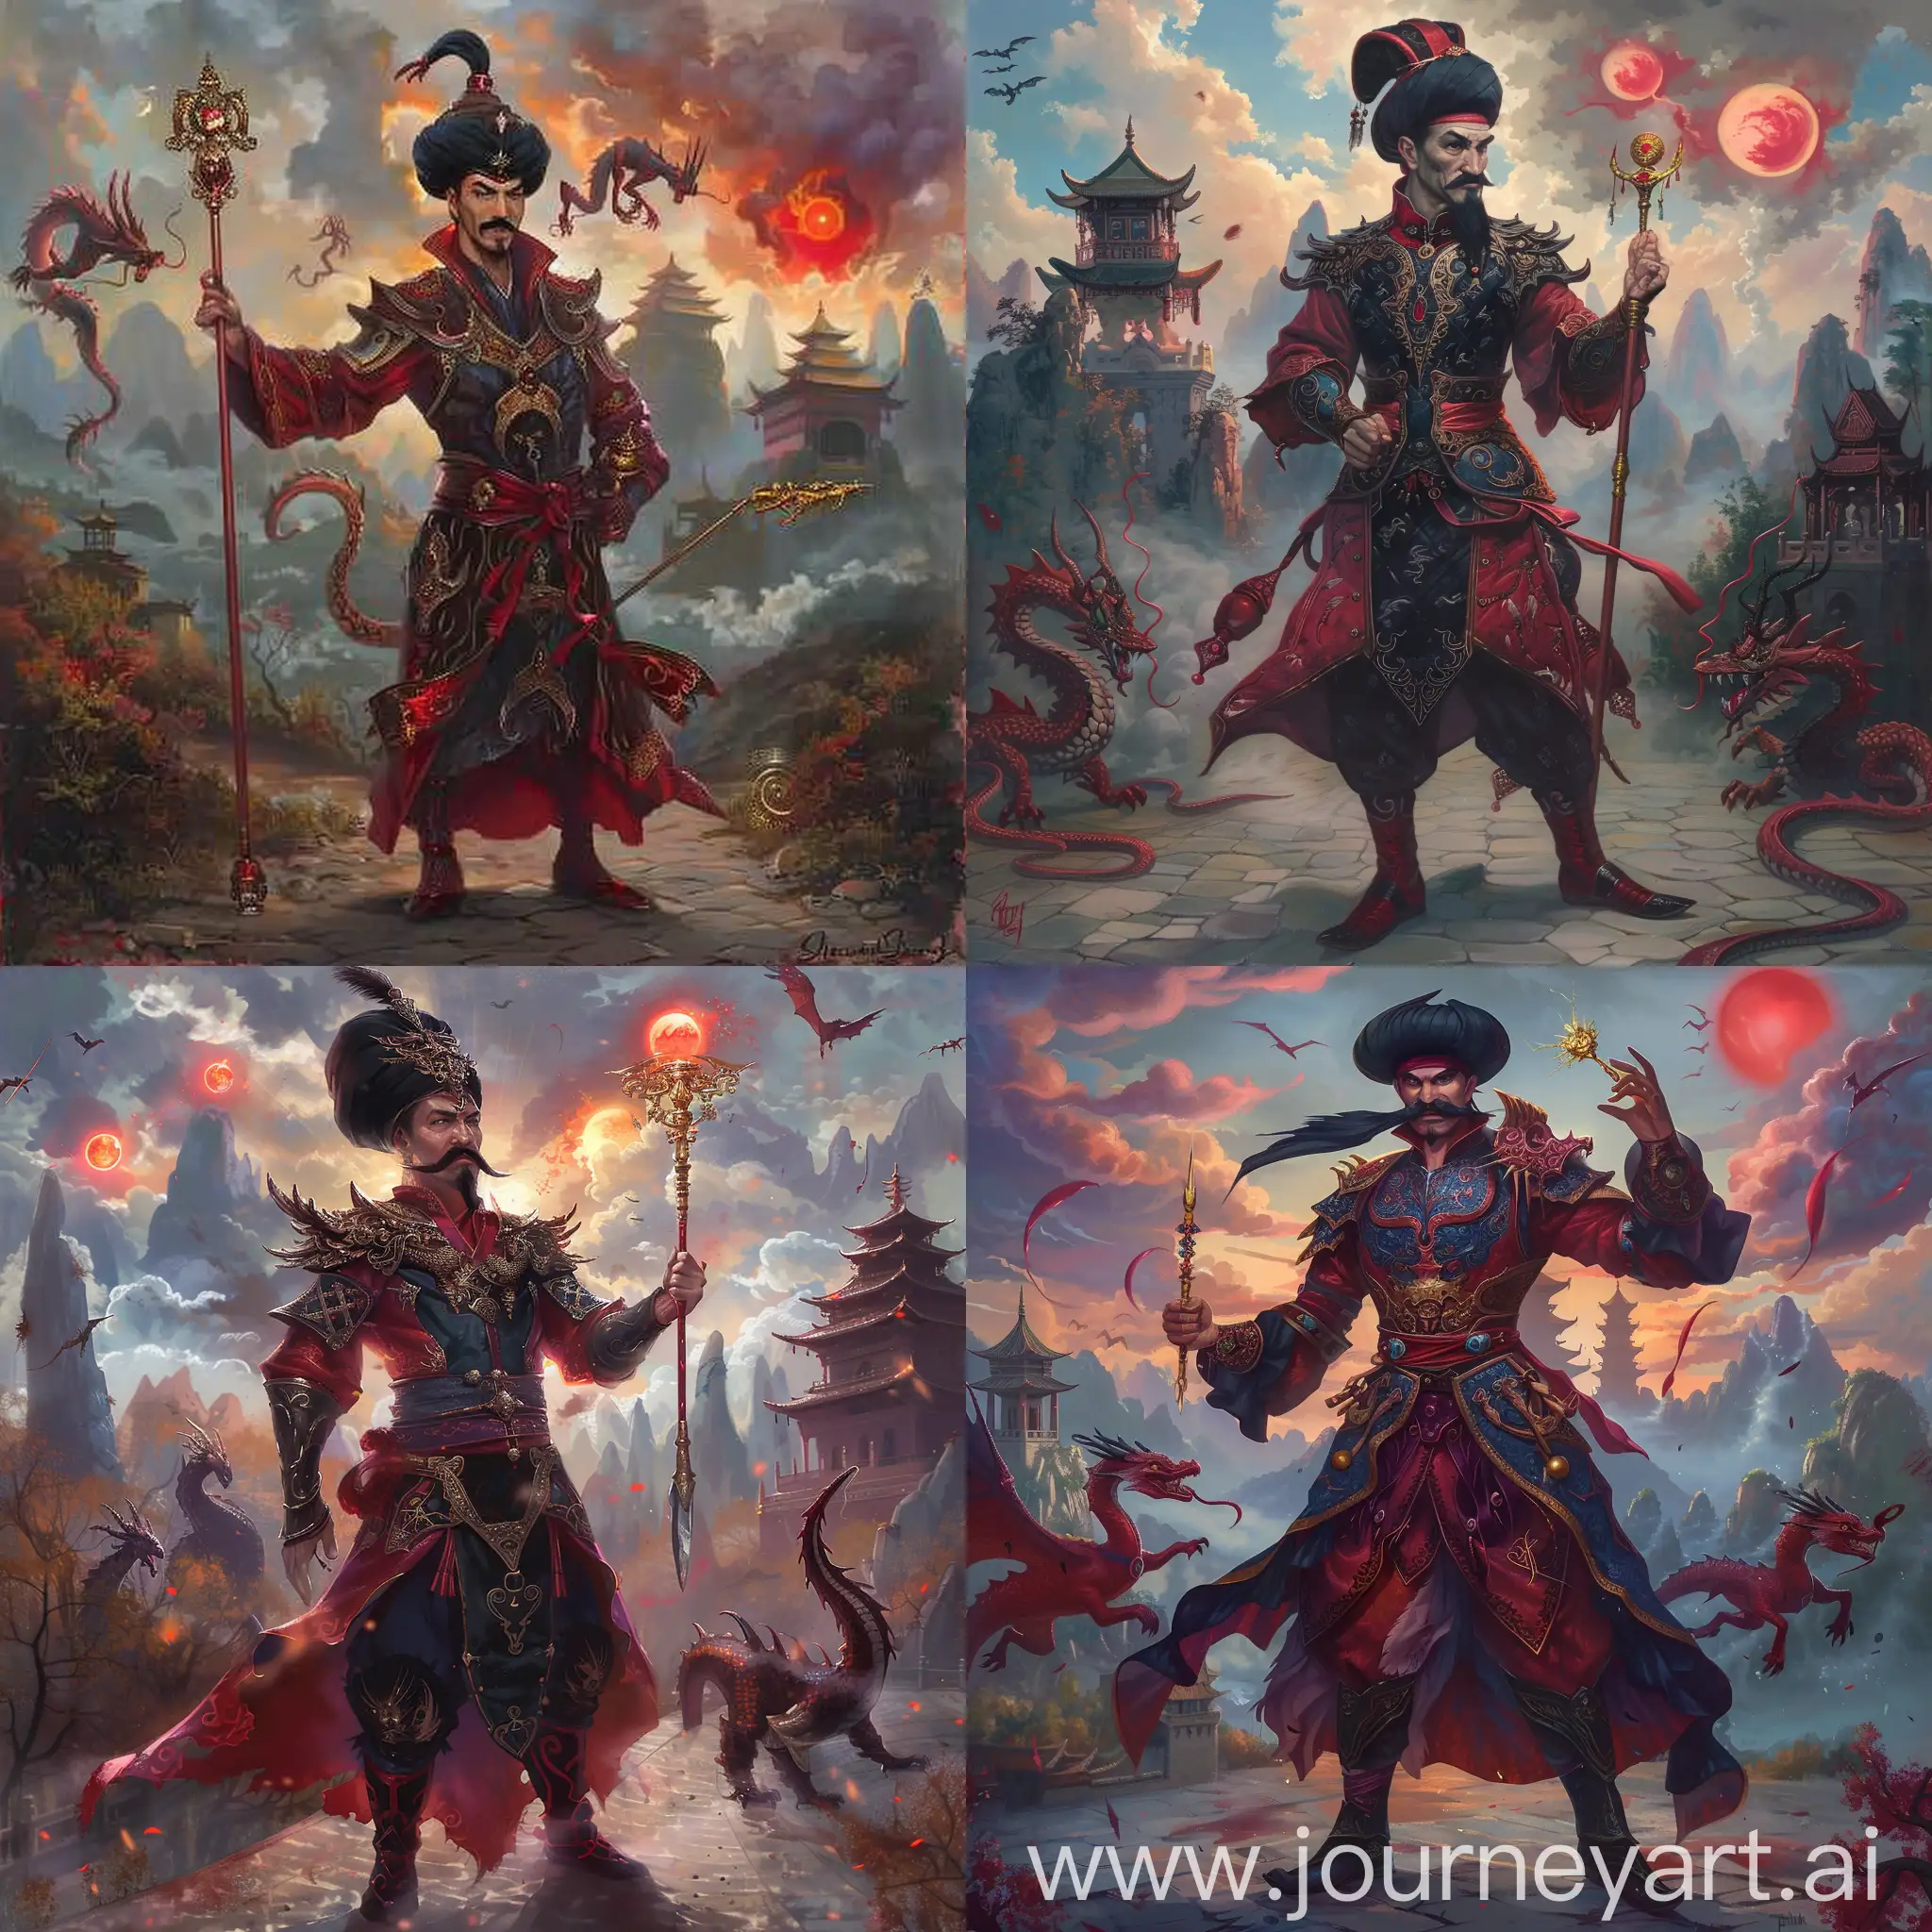 Historic painting style:

a Disney Villain, Vizir Jafar, he has Arabian black  mustache, he is in deep red and black color Arabian medieval style, armor, he wears Jafar's hat and dark red boots, he holds a Chinese style golden dragon magic wand in right hand, 

Chinese Guilin mountains and temple as background,  evil iced dragons and three small red blood suns in cloudy sky.